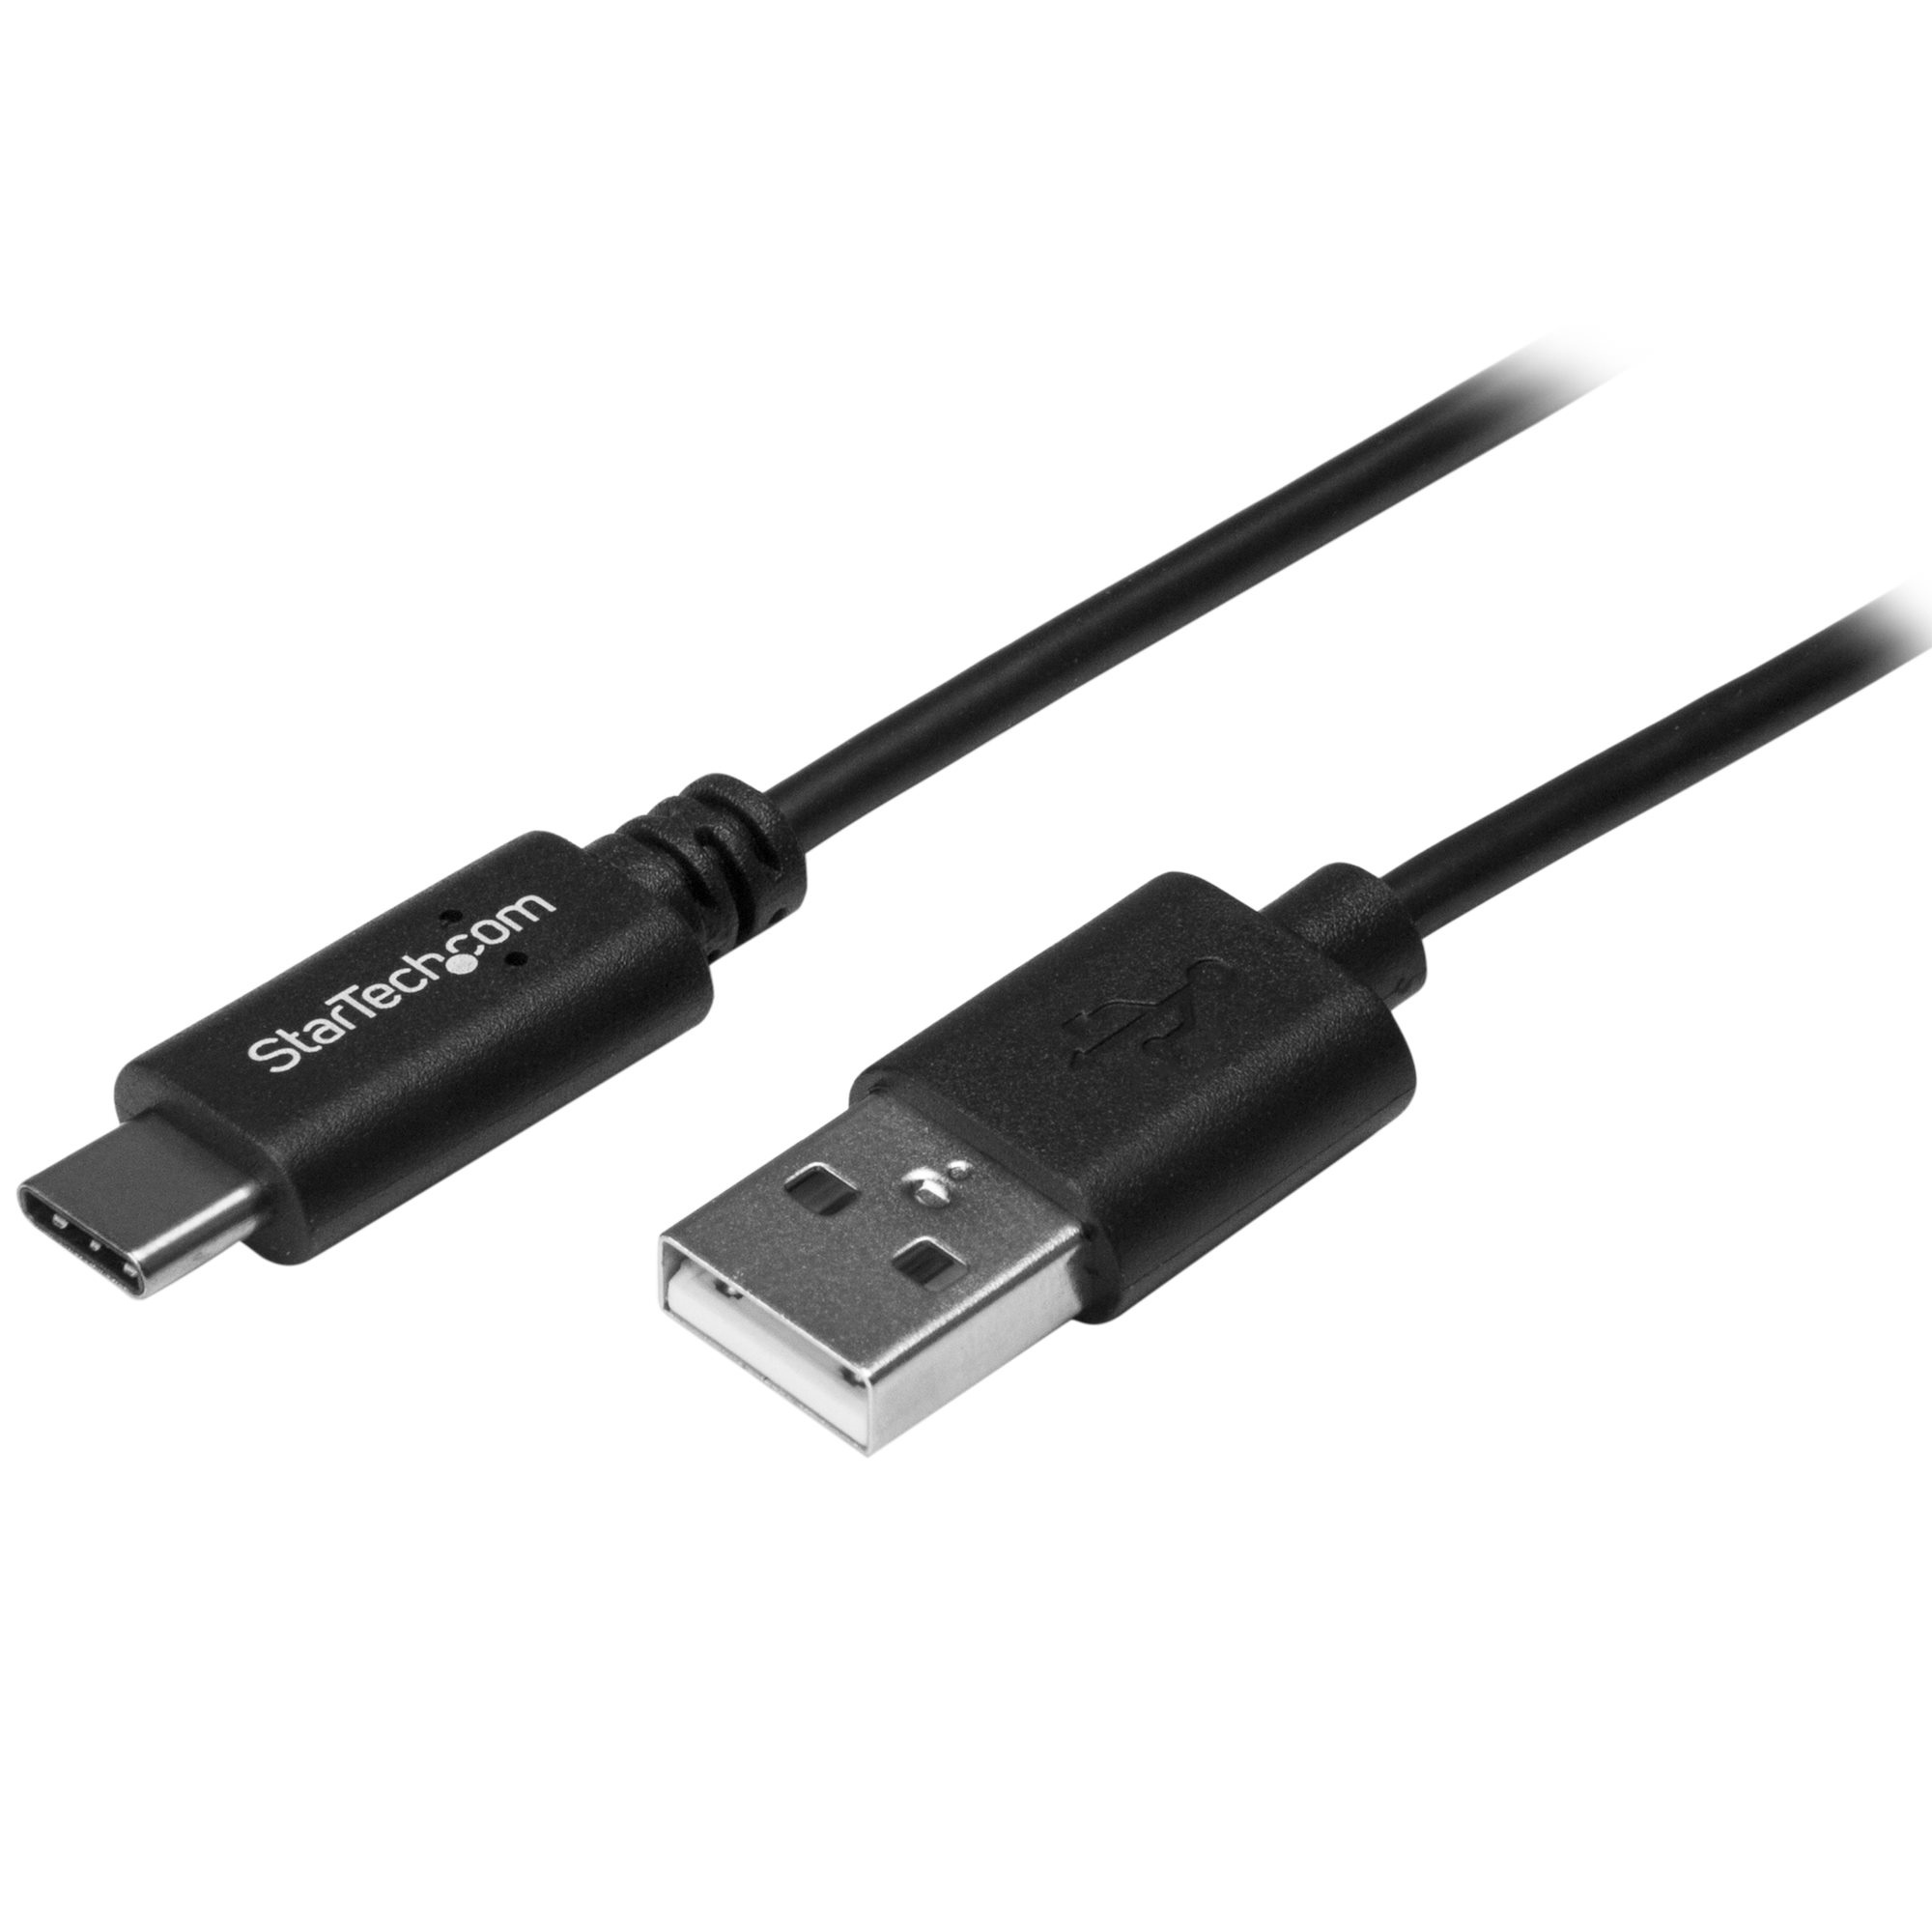 StarTech USB-C to USB-A Cable - USB 2.0 ( 2m)